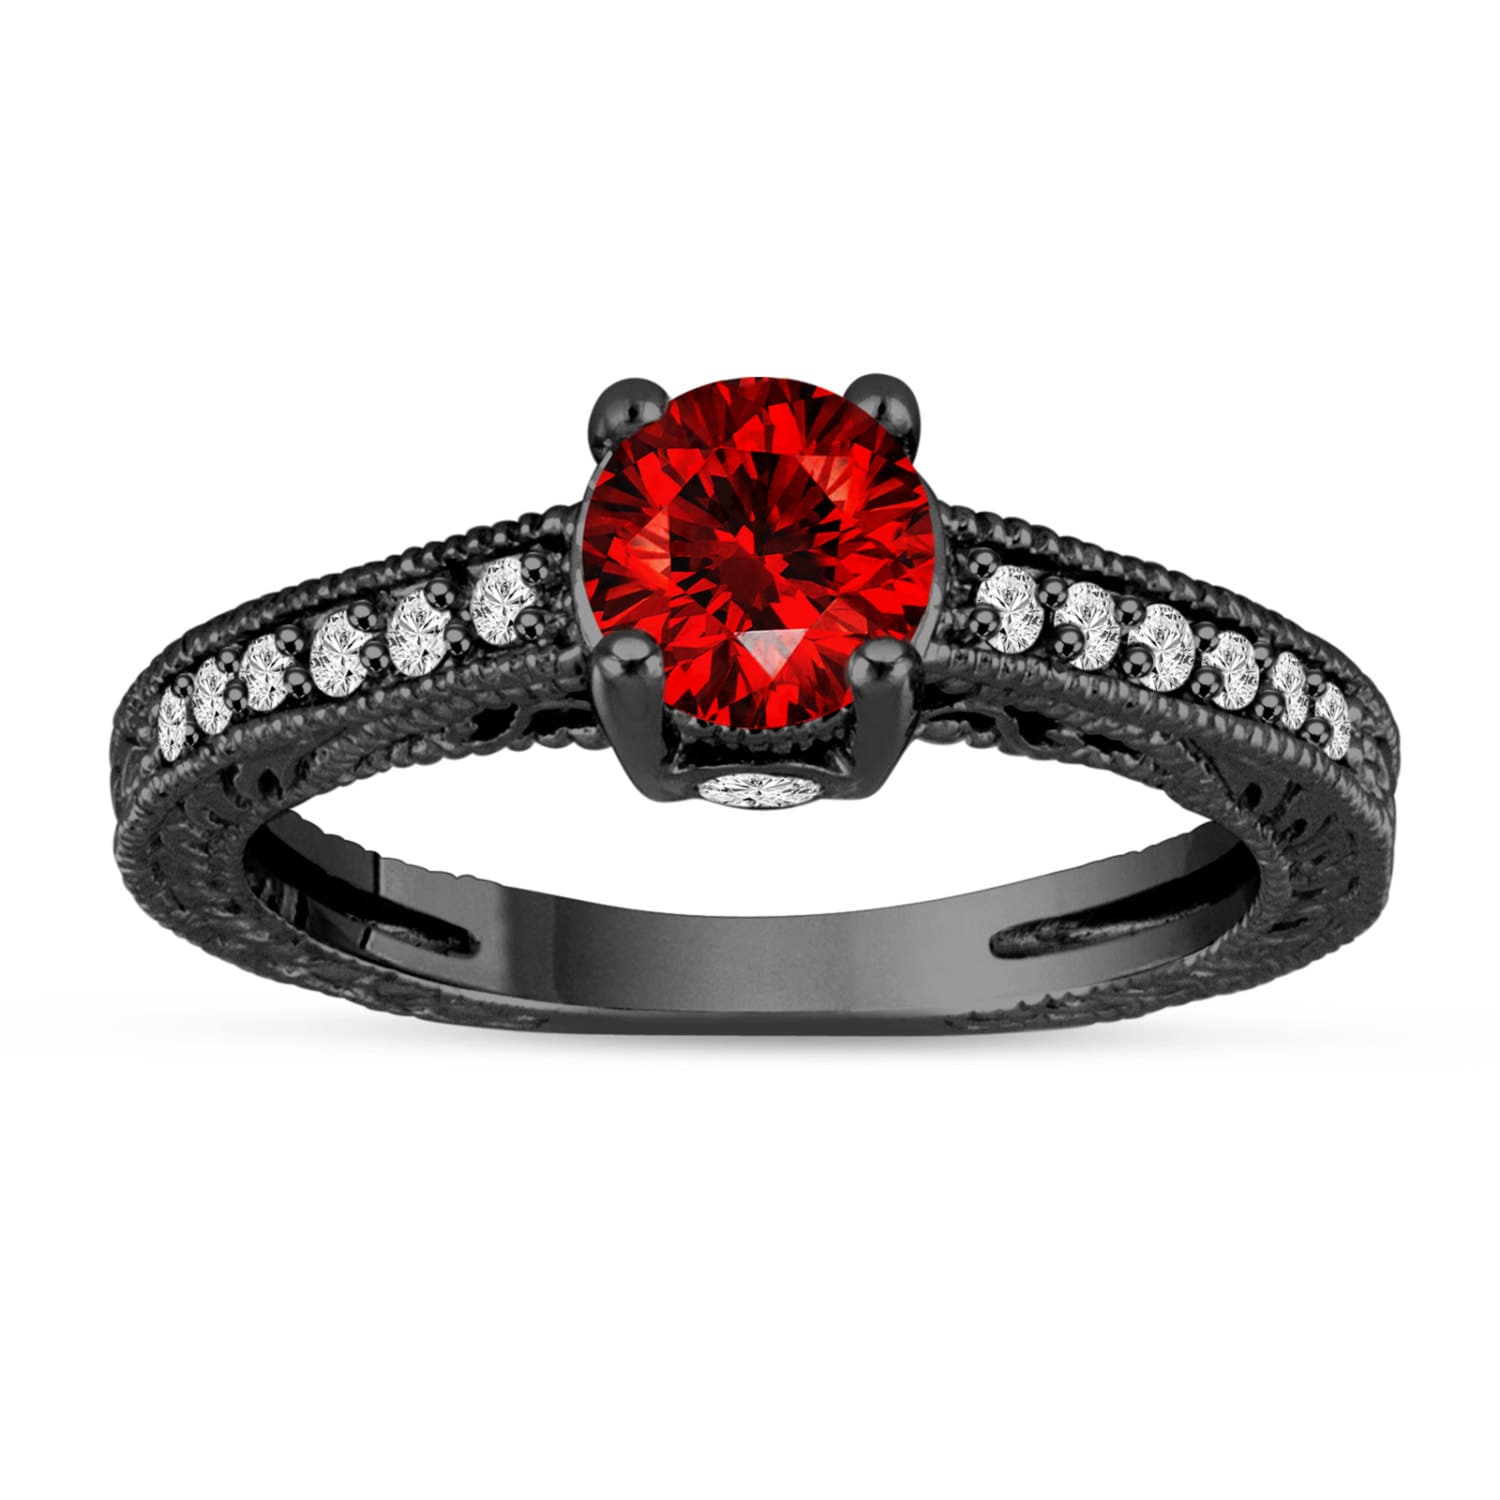 Buy Diamonds Red Crystal Zircon Ring with Heart Shaped Red Diamond Ring  Diamond Ring at Amazon.in